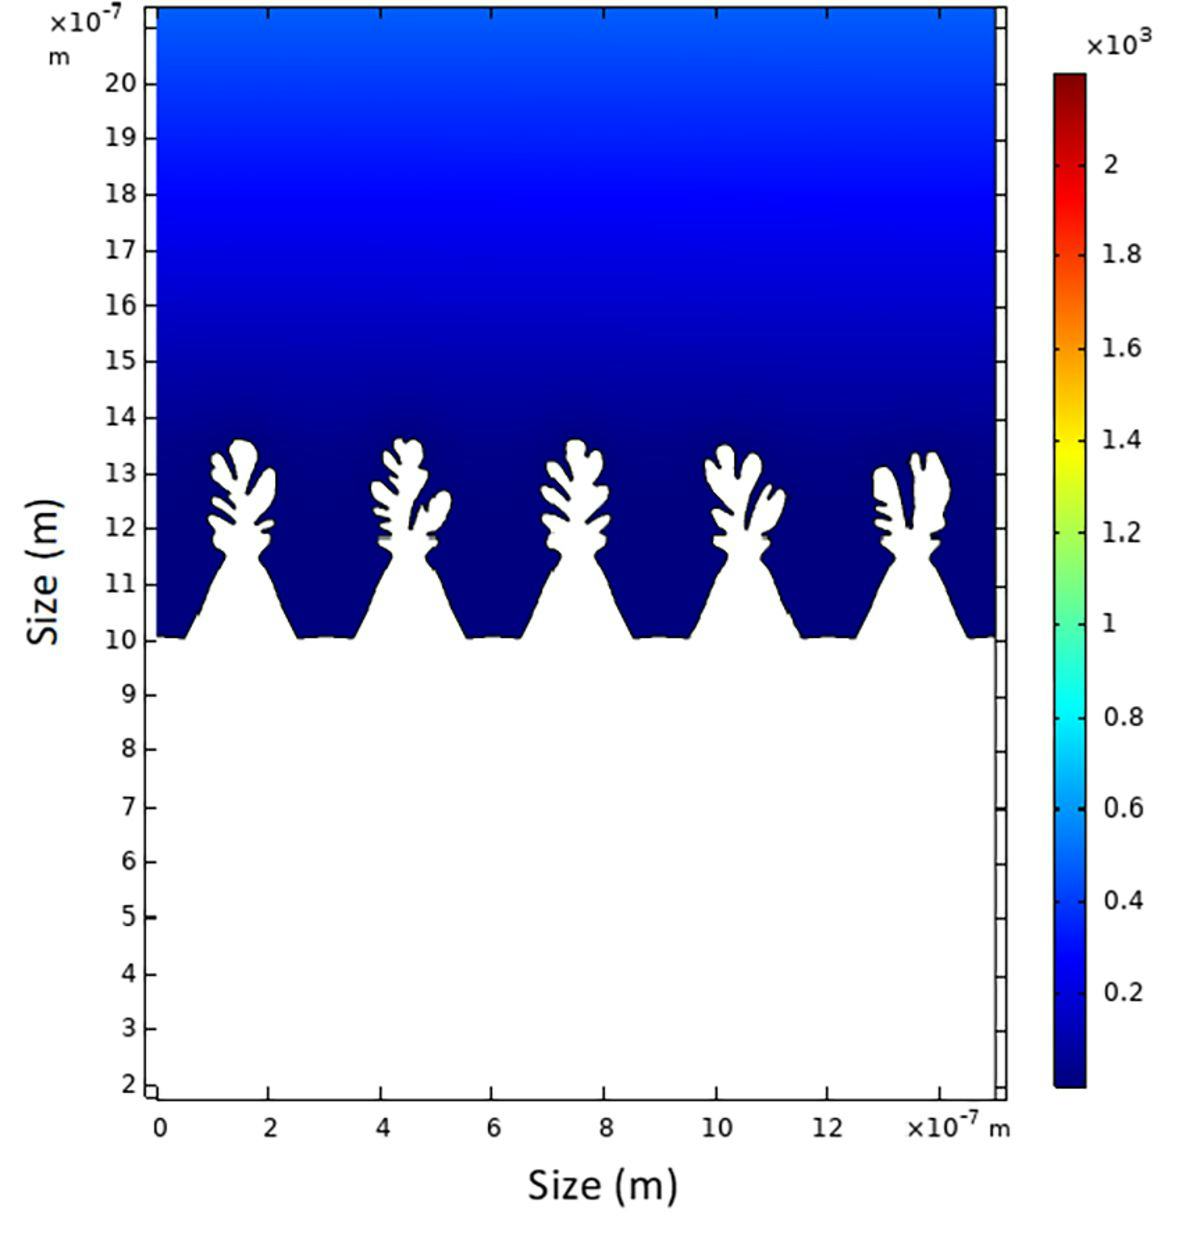 A simulation result showing Li dendrite formation on an anode surface